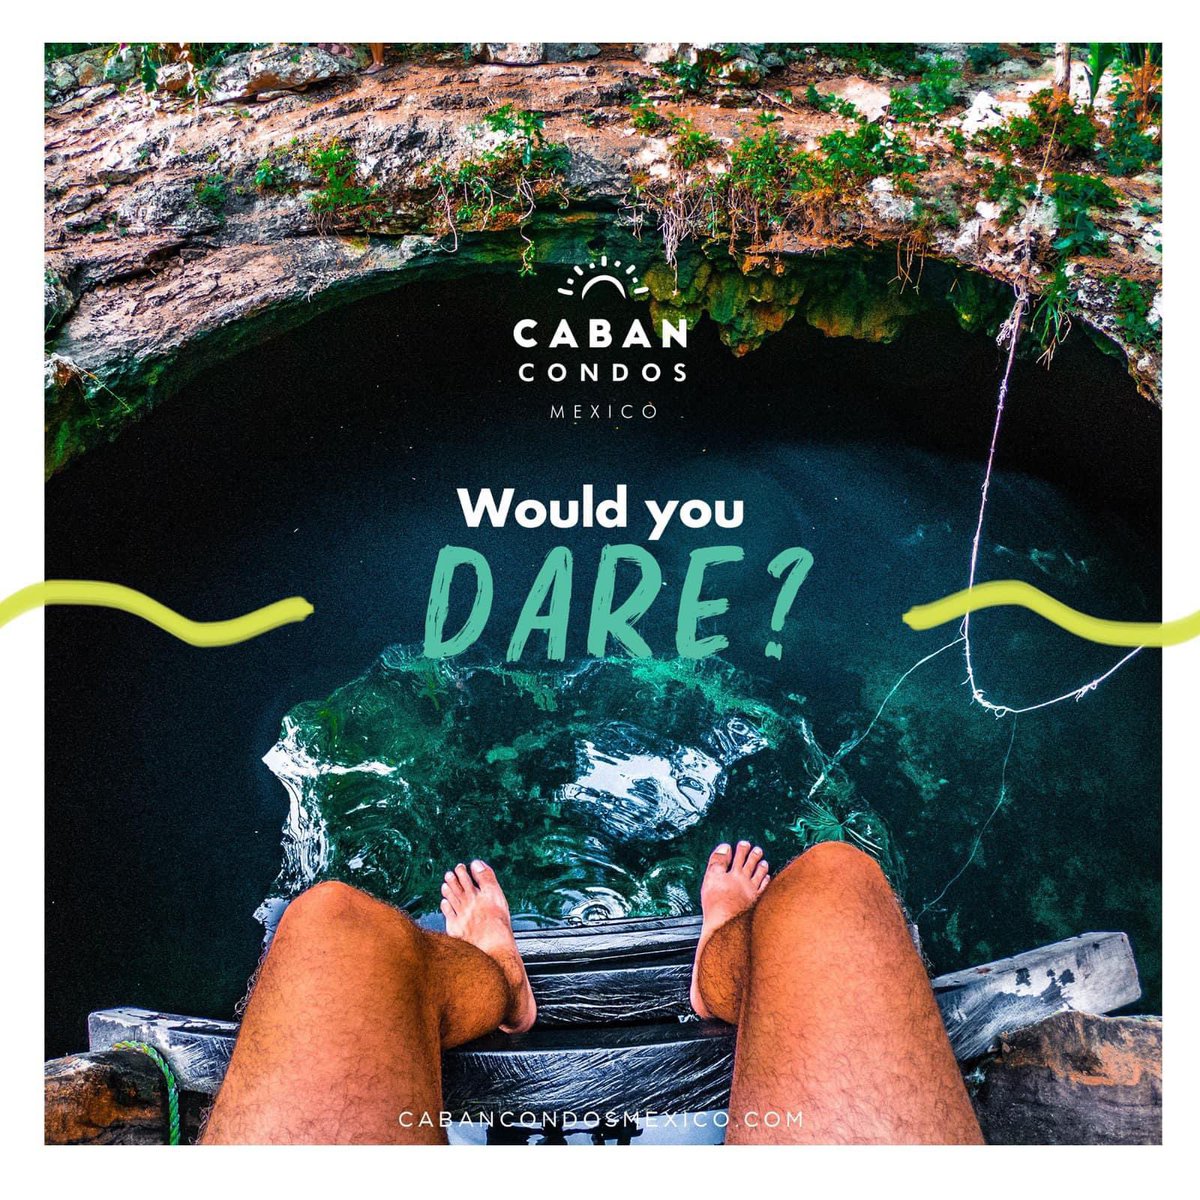 Taking the plunge into the unknown, one cenote at a time. 💦 

Who's coming with? 

🗺️ Yucatan, Mexico 

#CenoteAdventure #Yucatan #MexicoTravel #DareToJump #NatureLovers #ExploreMexico #TravelMexico #HiddenGems #EcoTourism #AdventureSeekers #WaterLovers #BucketList